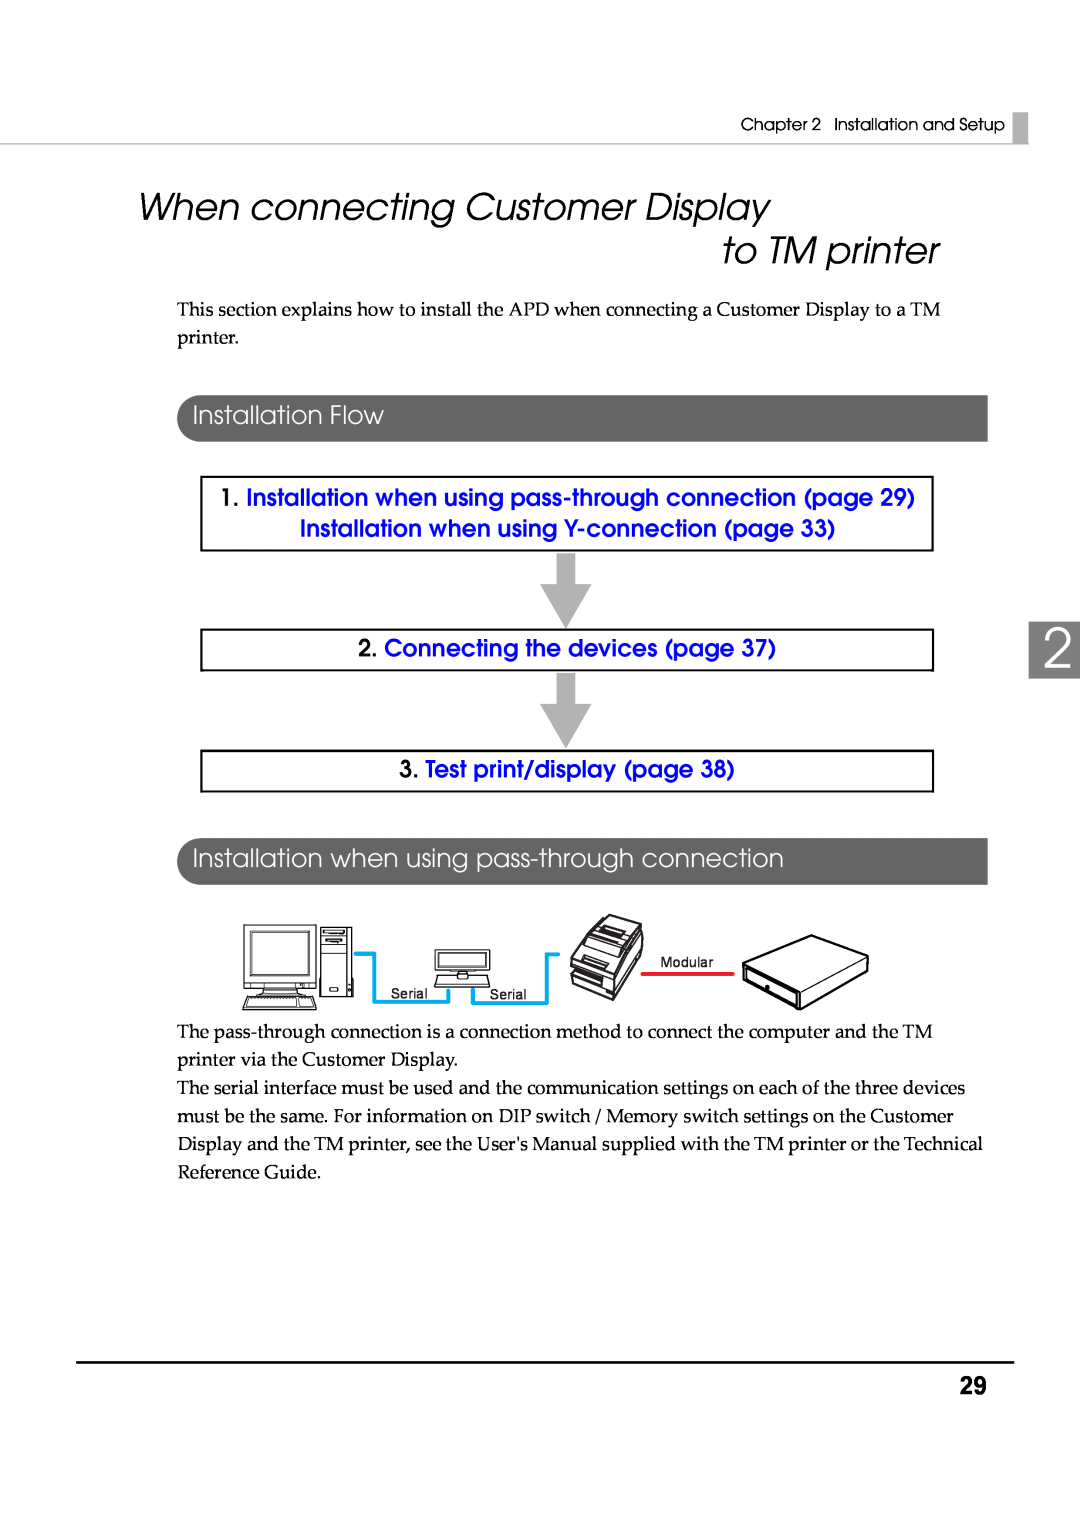 Epson M00002104 When connecting Customer Display to TM printer, Installation when using pass-through connection 